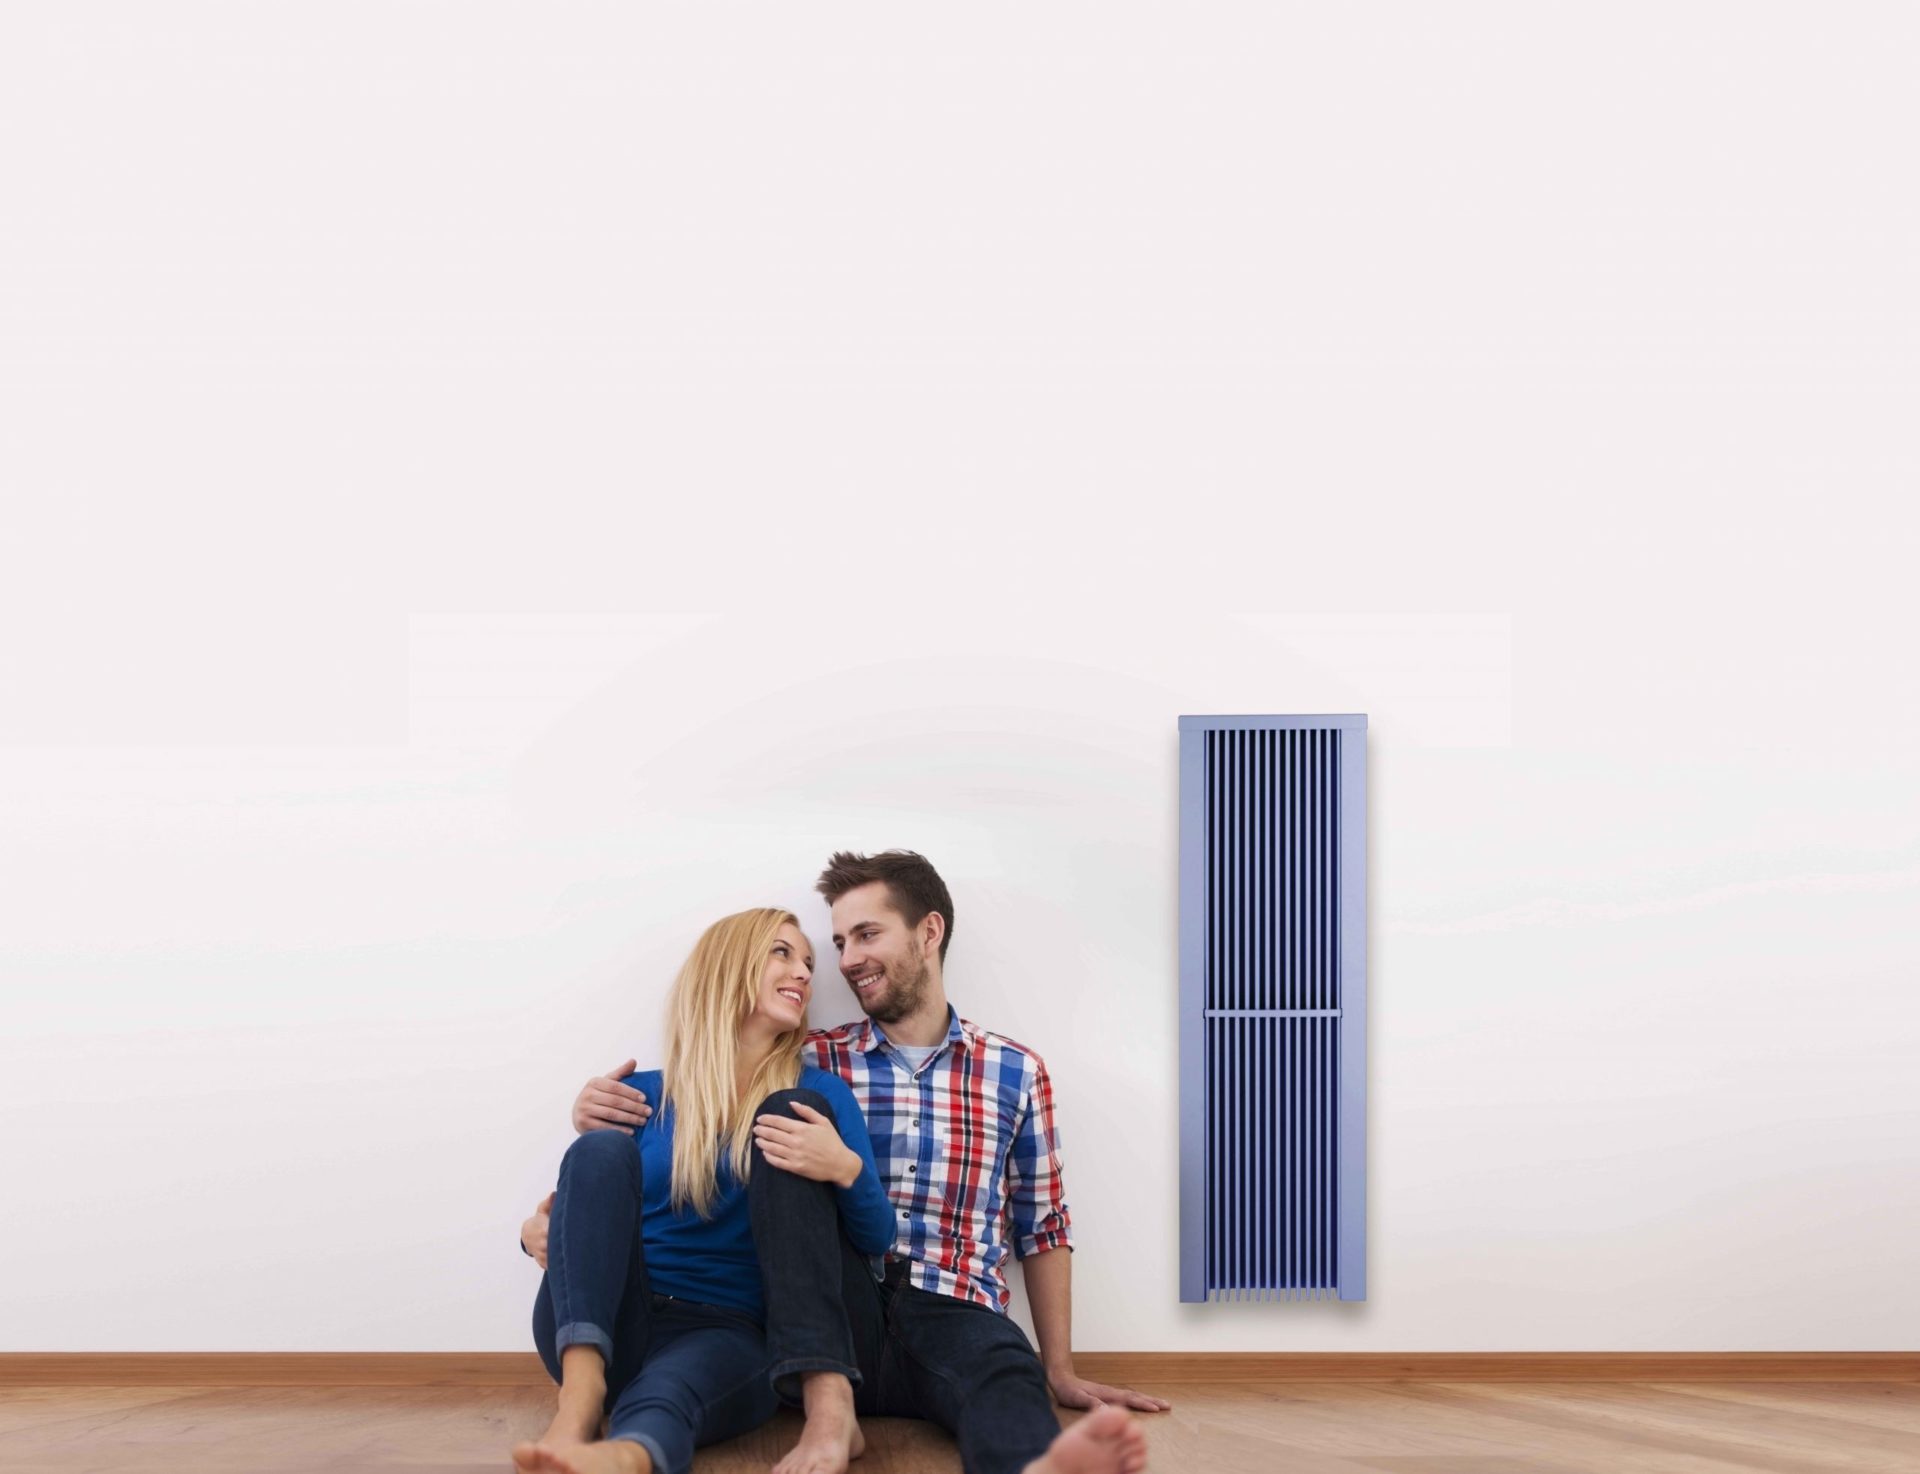 Young couple sitting on floor next to a blue Sunflow classic radiator, against a white wall with wood flooring.